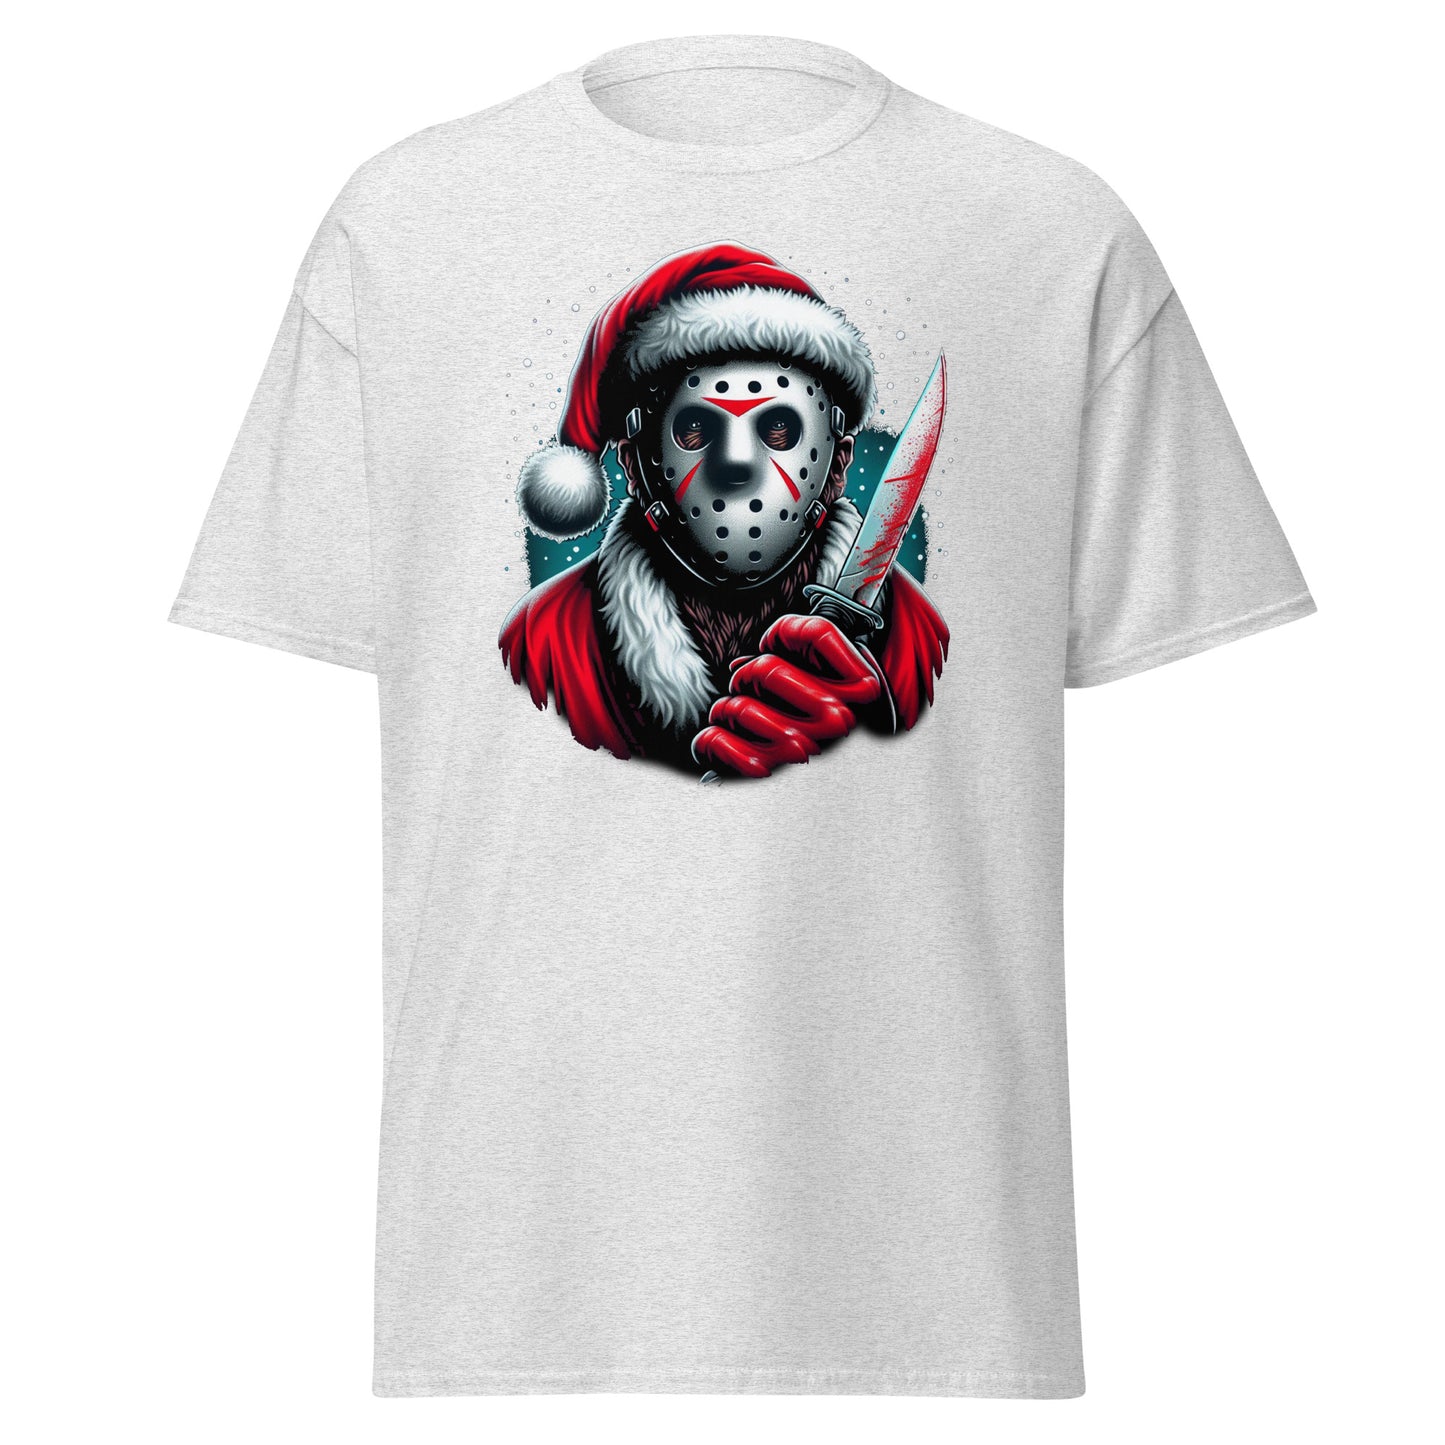 Jason Voorhees Santa T-Shirt - Unwrap the Horror for the Holidays